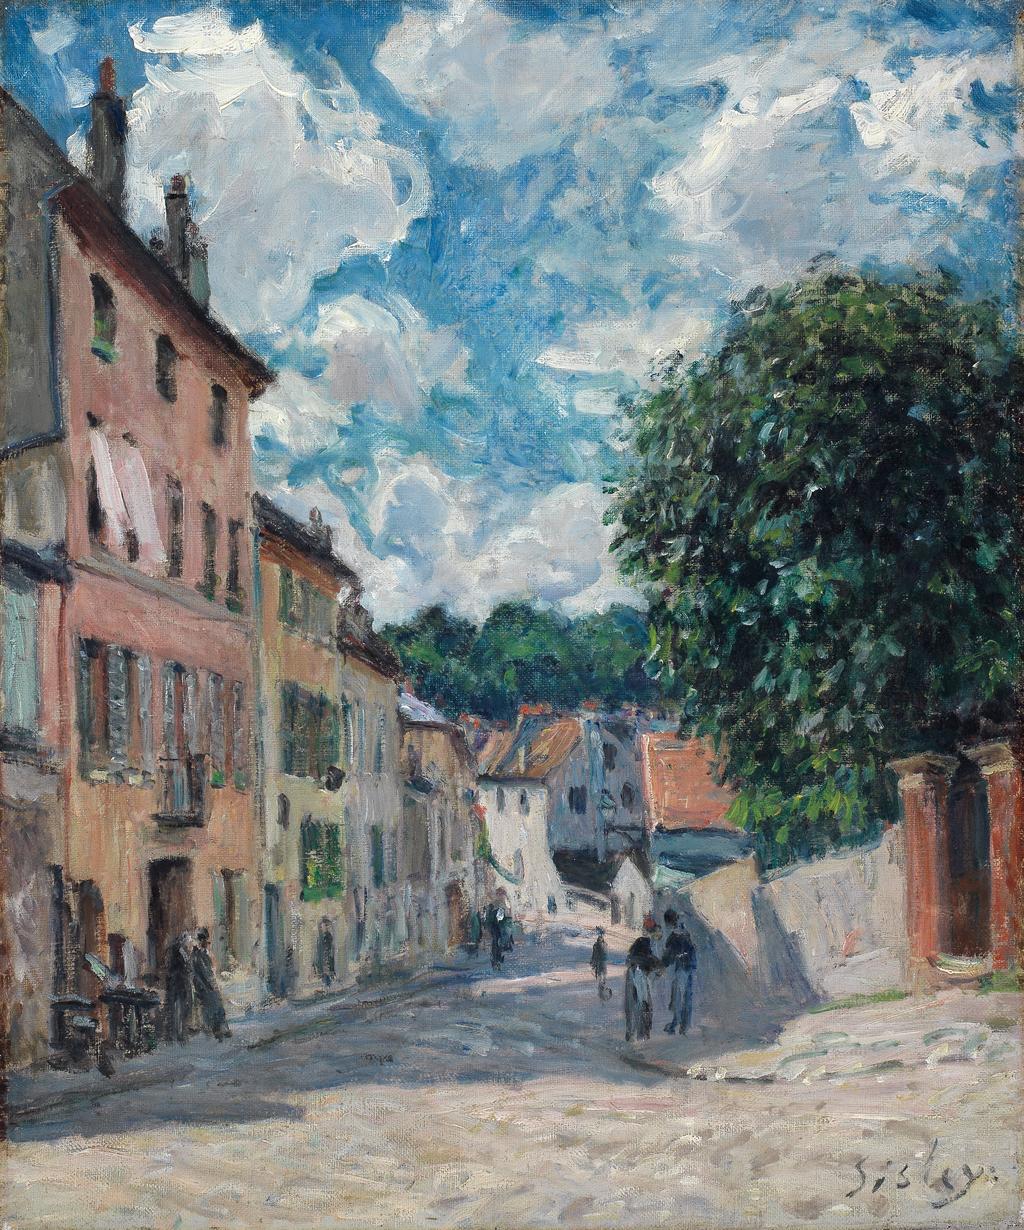 An image of Rue à Louveciennes. Translated title: A Street, Possibly in Port-Marly. Sisley, Alfred (French, 1839-1899). Oil on canvas, height 46.4 cm, width 36.7 cm, 1875-1877.